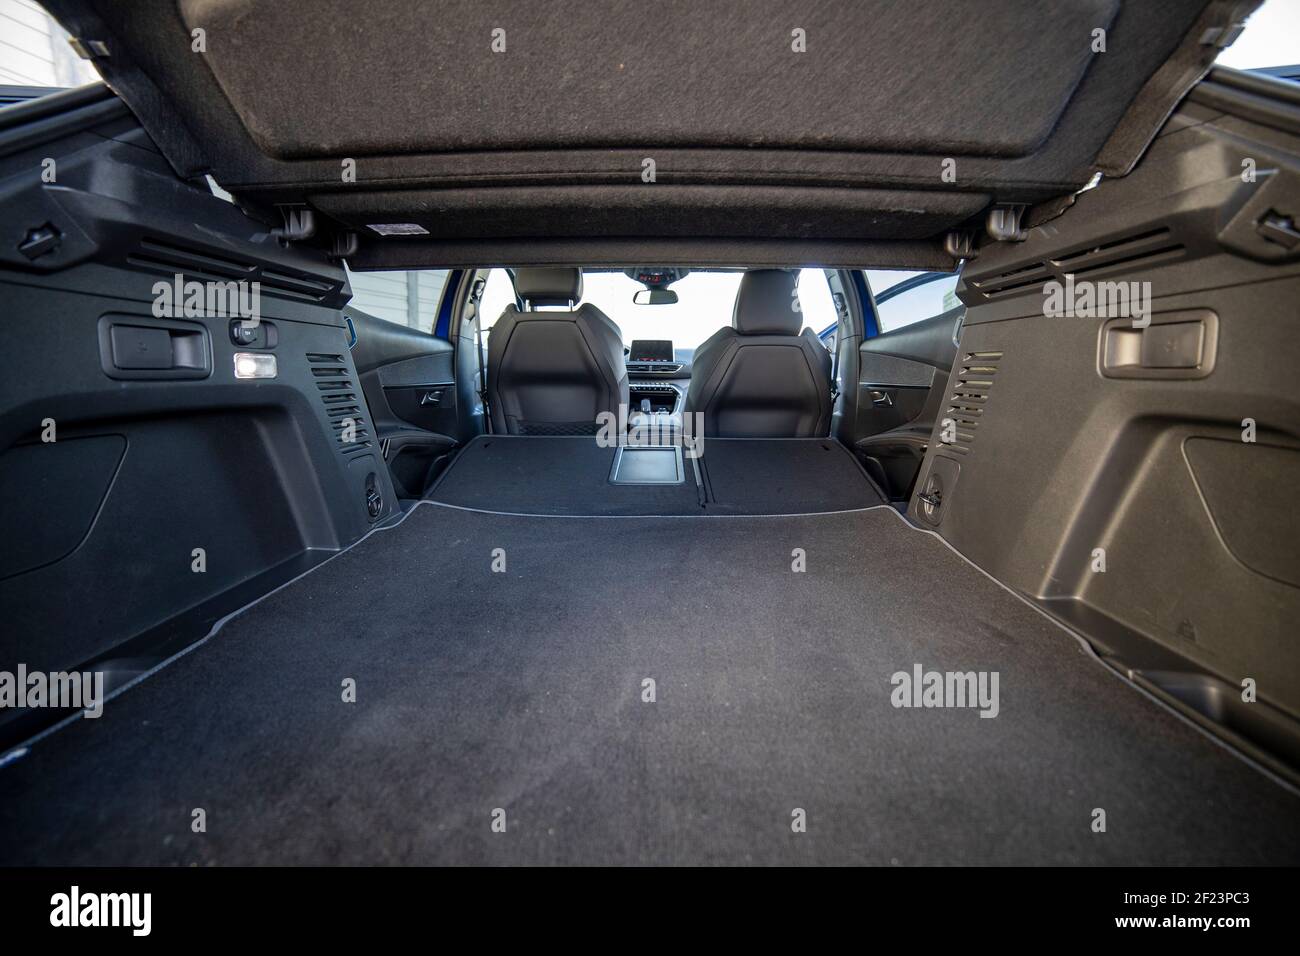 empty trunk of a modern car with folded rear seats. large interior volume. trunk view. Stock Photo